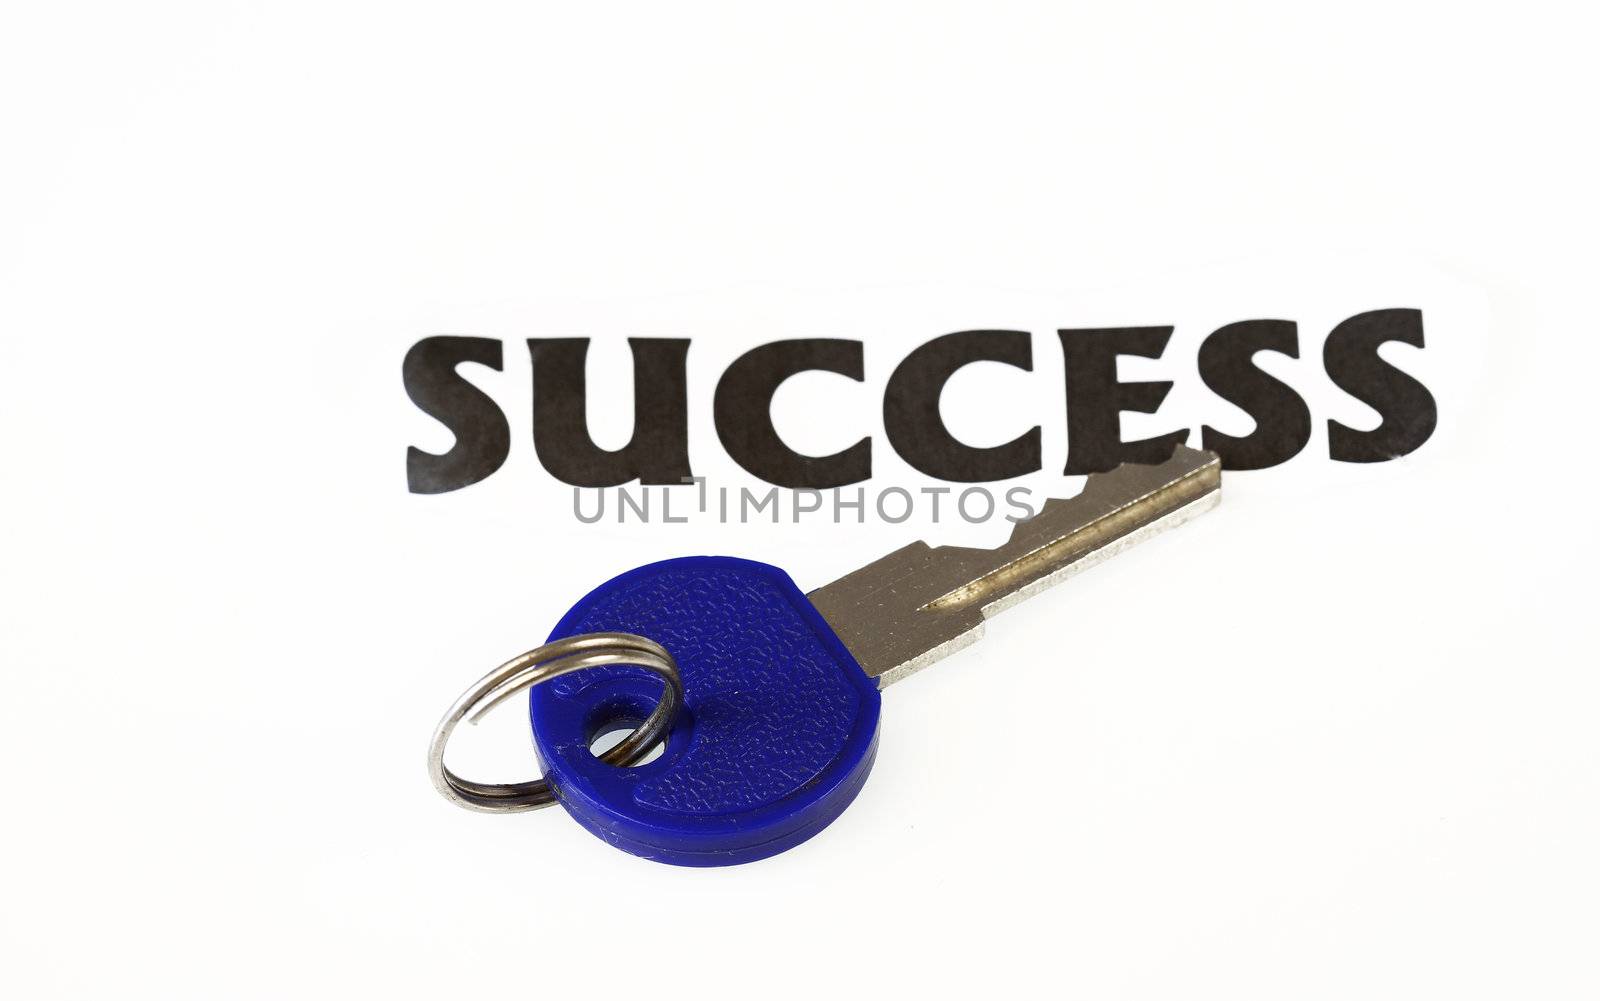 Key to Success concept - isolated in white background.